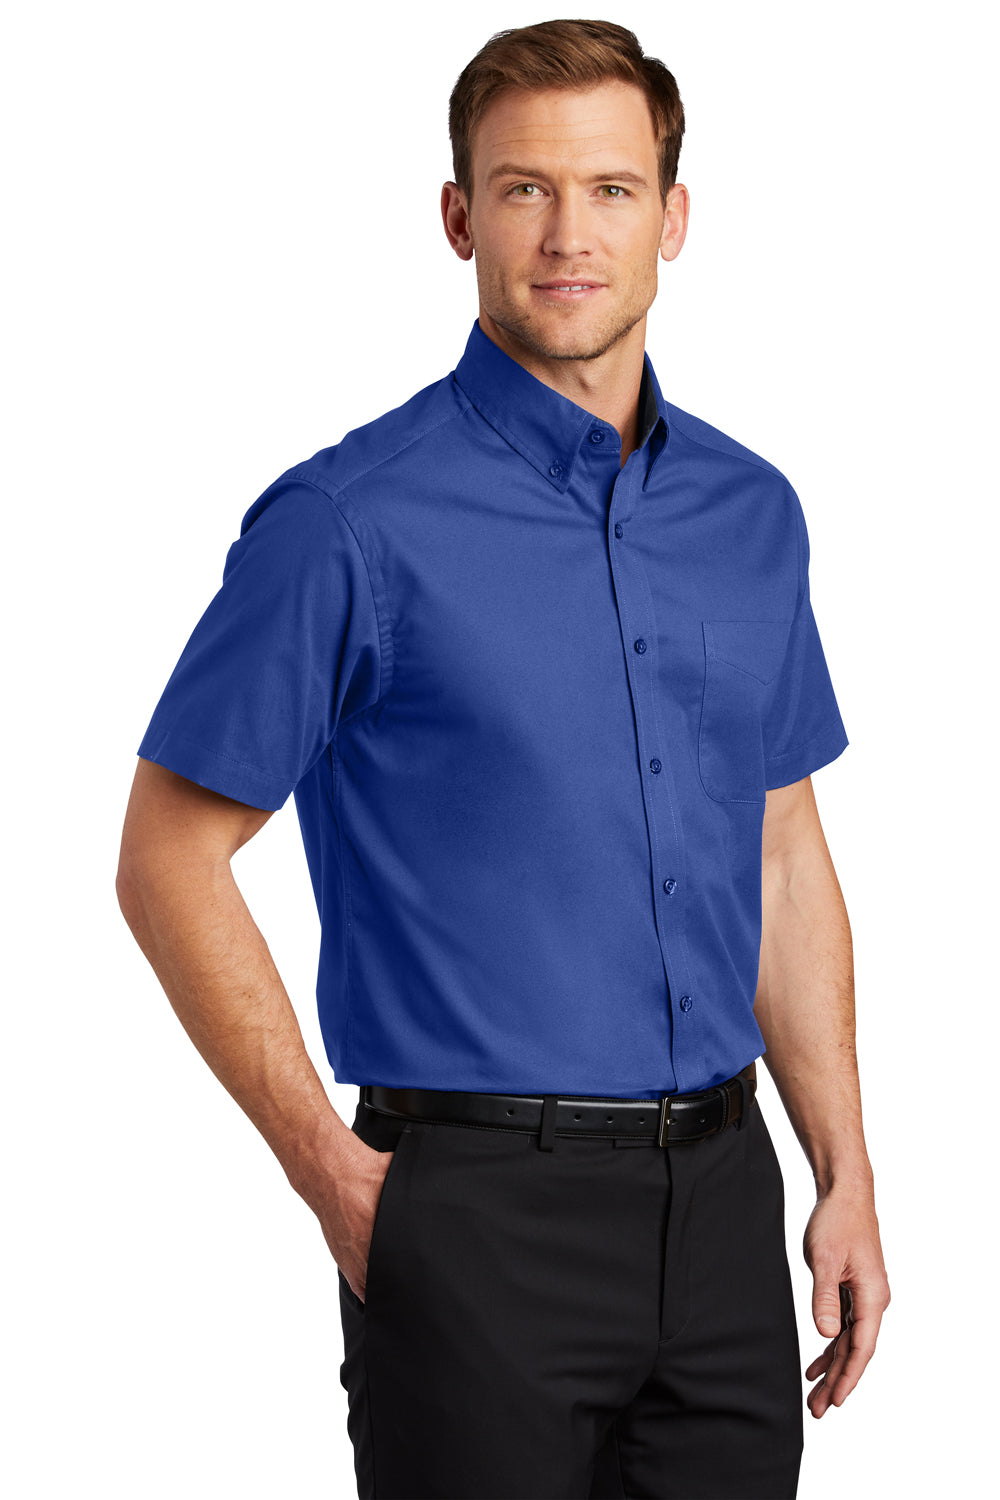 Port Authority S508/TLS508 Mens Royal Blue Easy Care Wrinkle Resistant ...